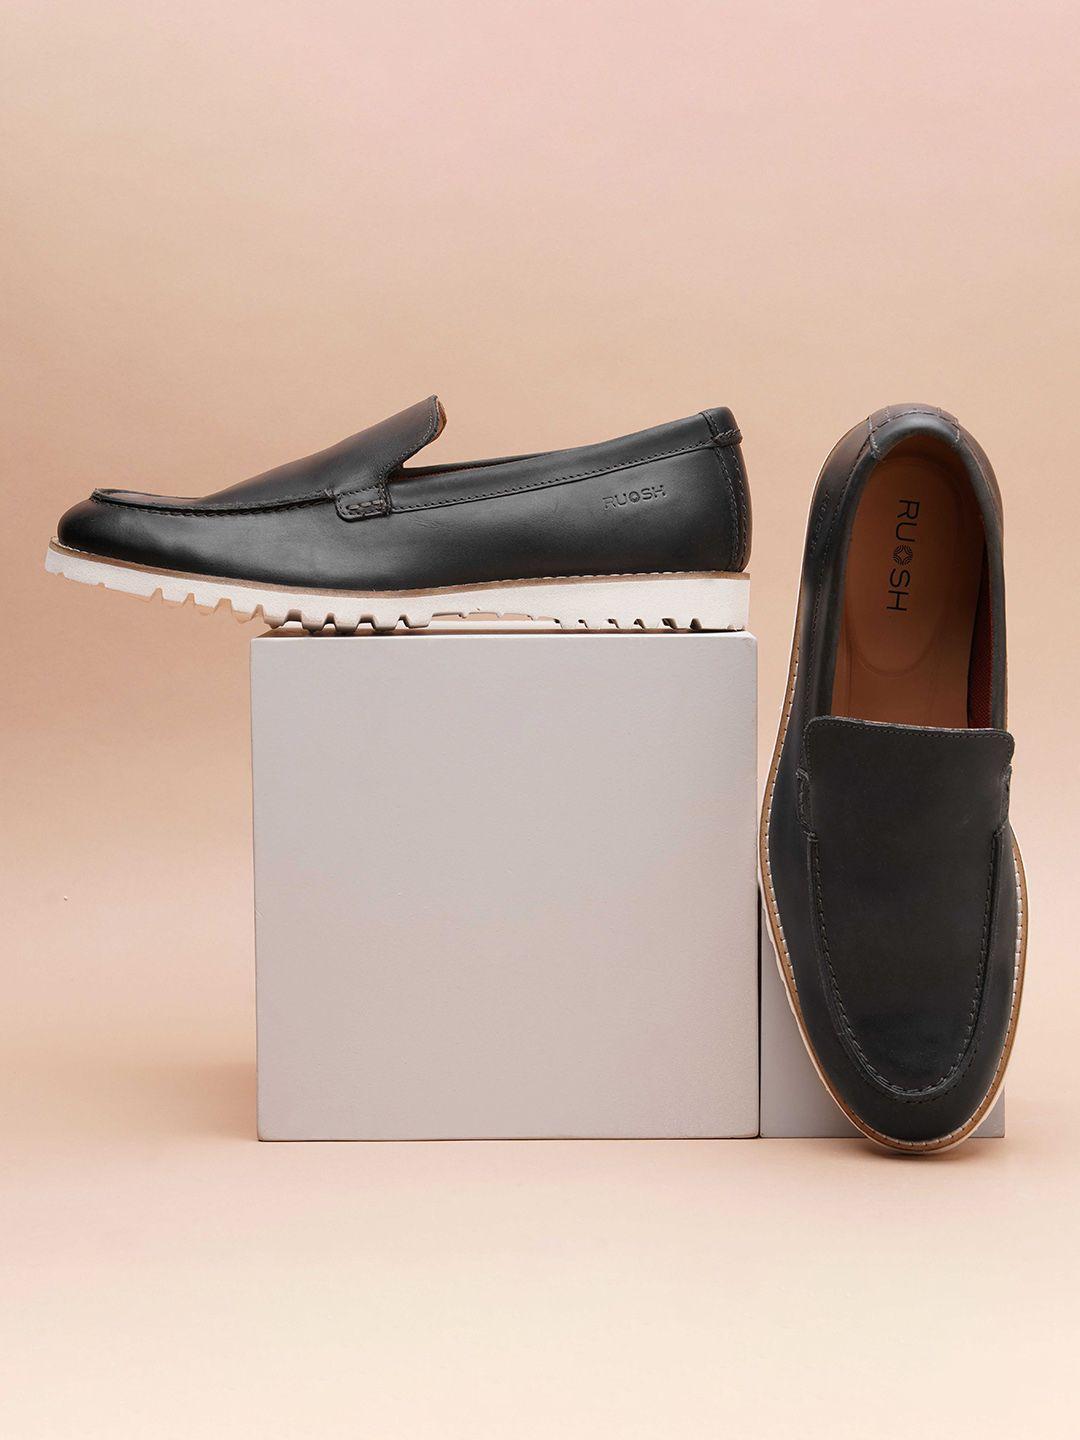 ruosh-men-comfort-insole-leather-loafers